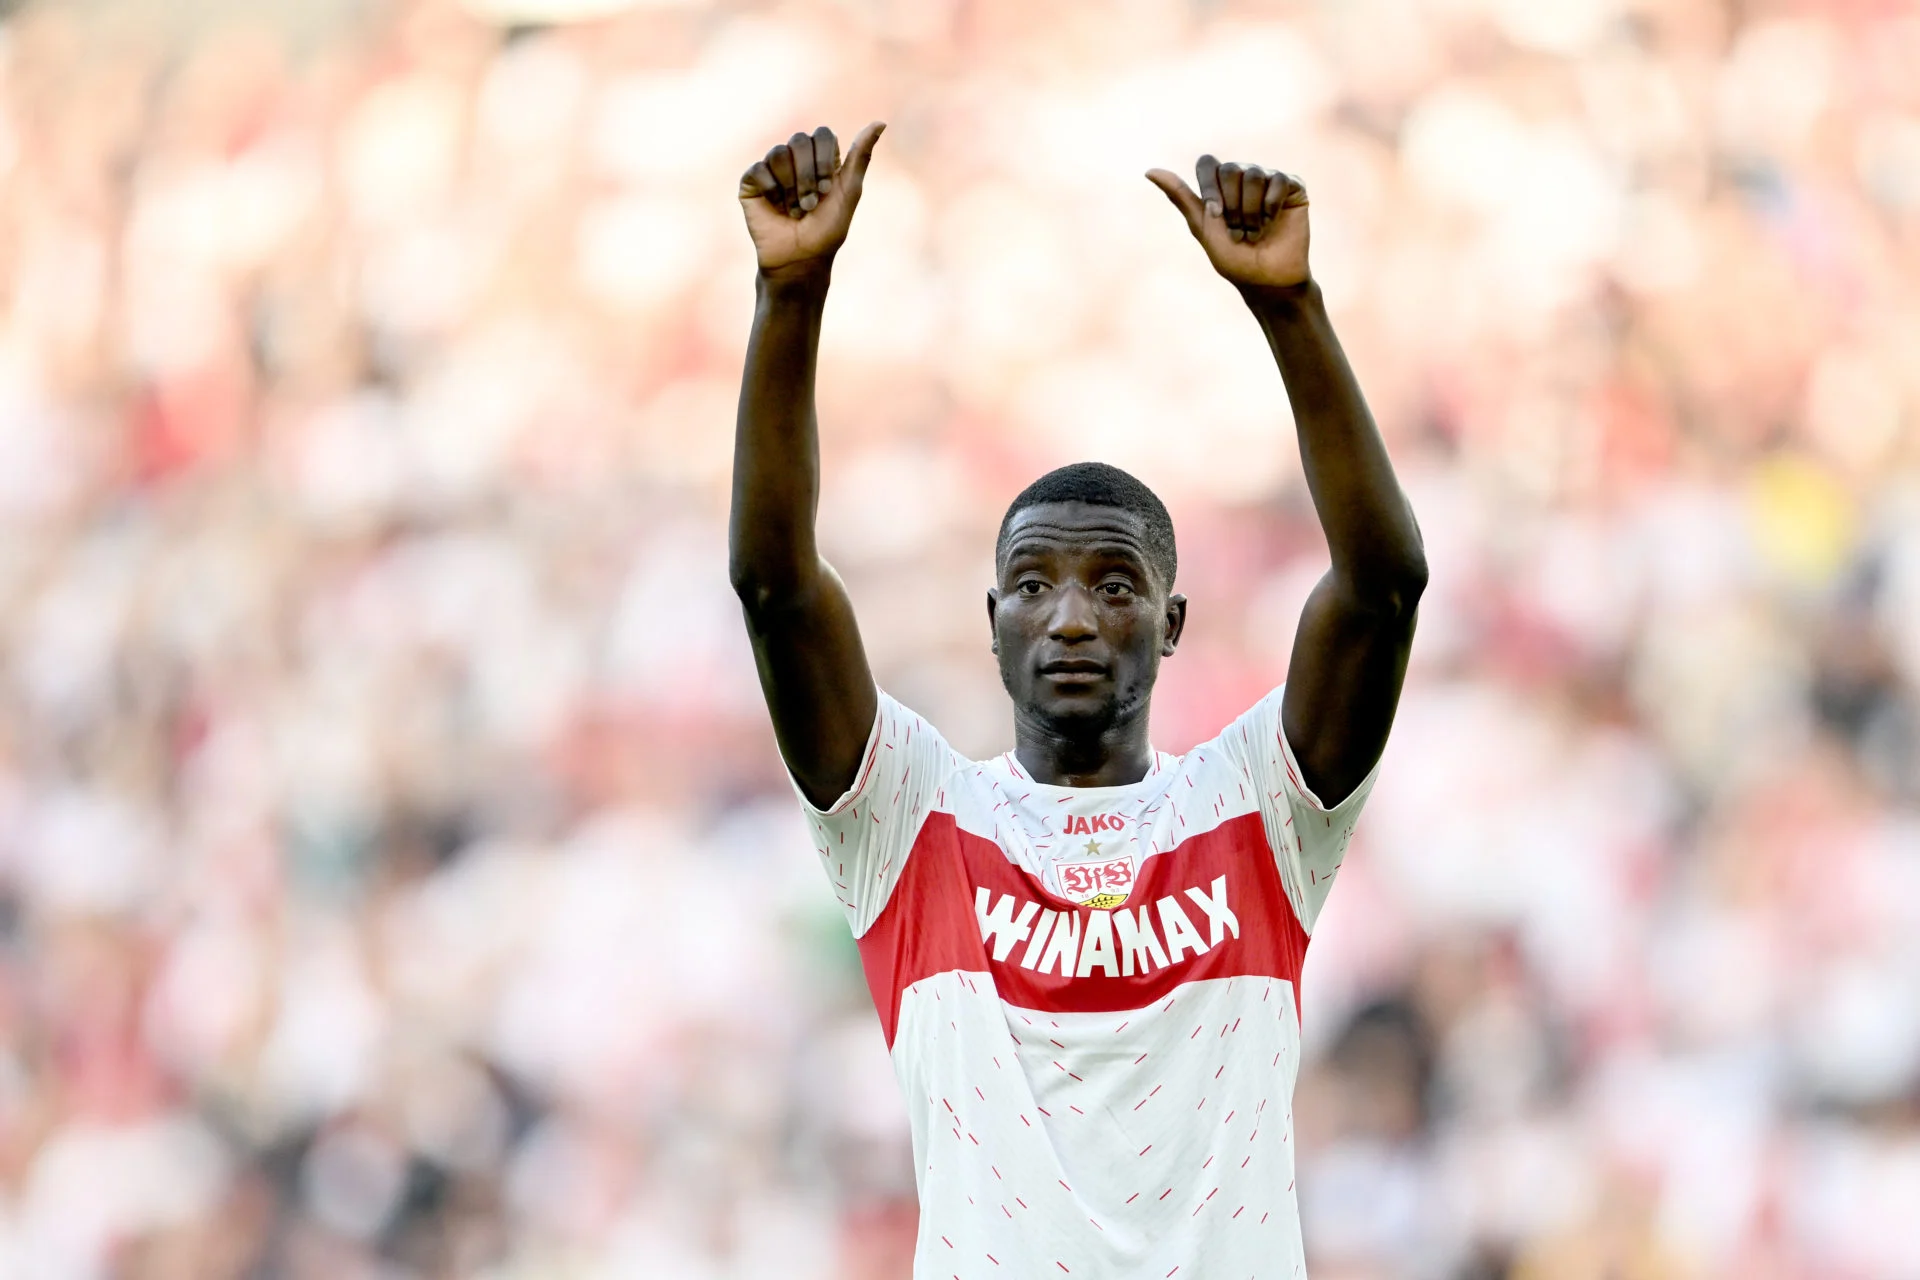 Milan has zeroed in on Serhou Guirassy to shore up their attack, but despite his manageable release clause, they still face big obstacles to sign him.